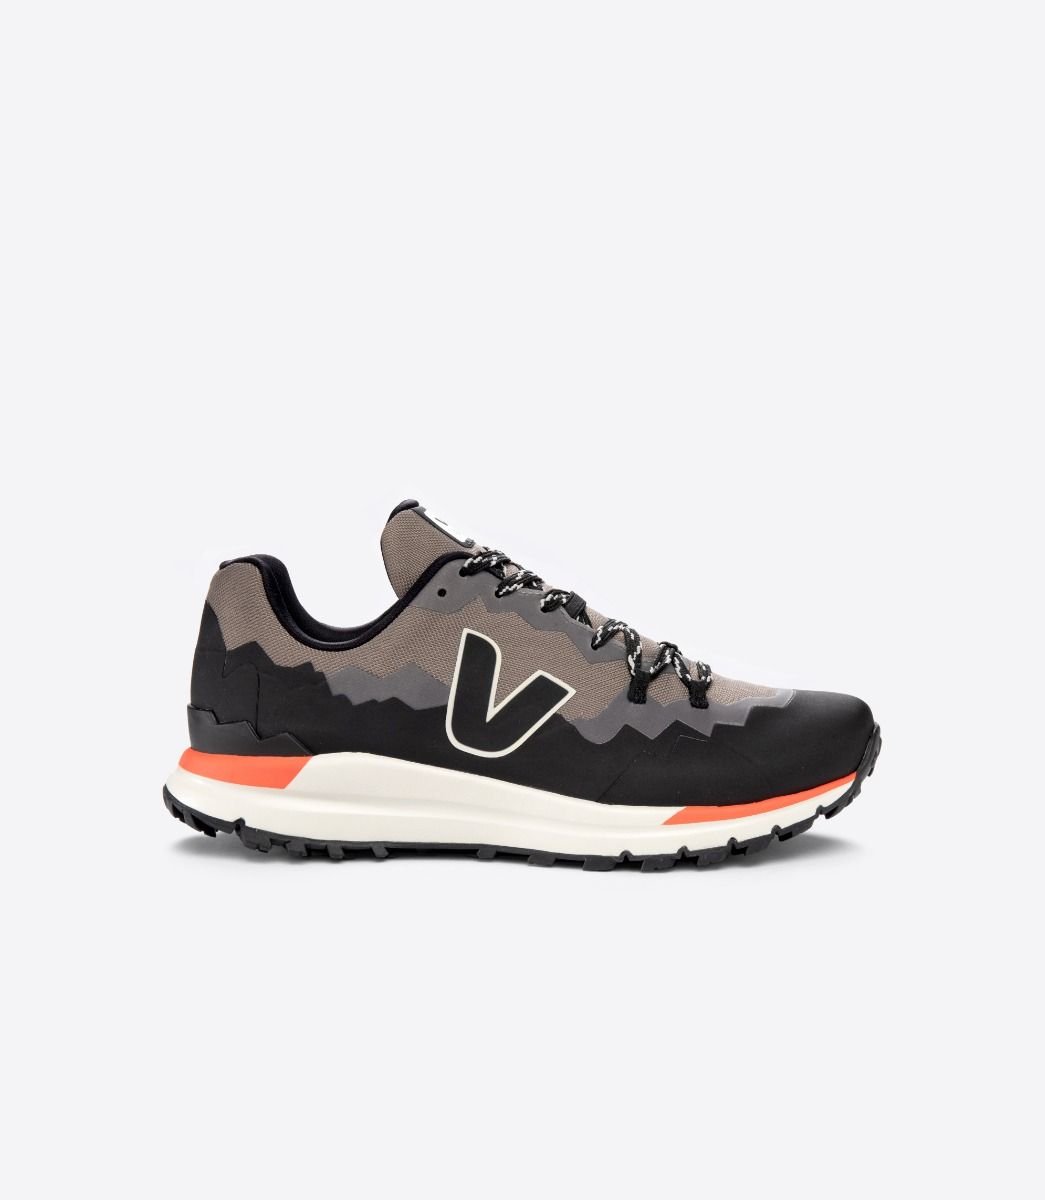 Lateral view of the Men's Fitz Roy Trek Shell by VEJA in the color Basalte/Black